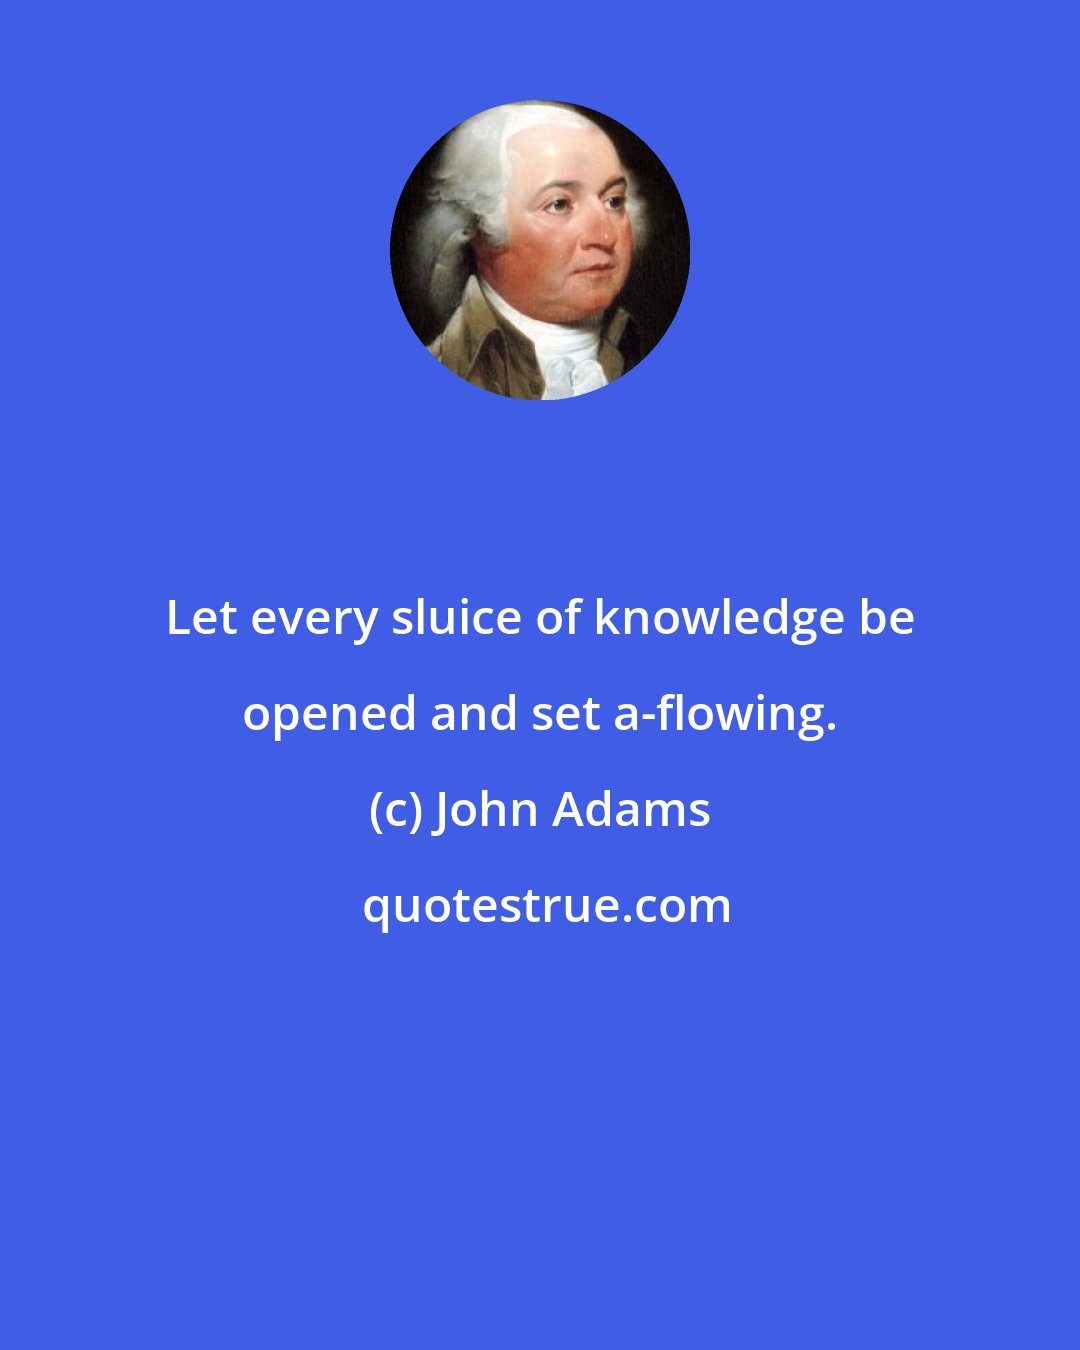 John Adams: Let every sluice of knowledge be opened and set a-flowing.